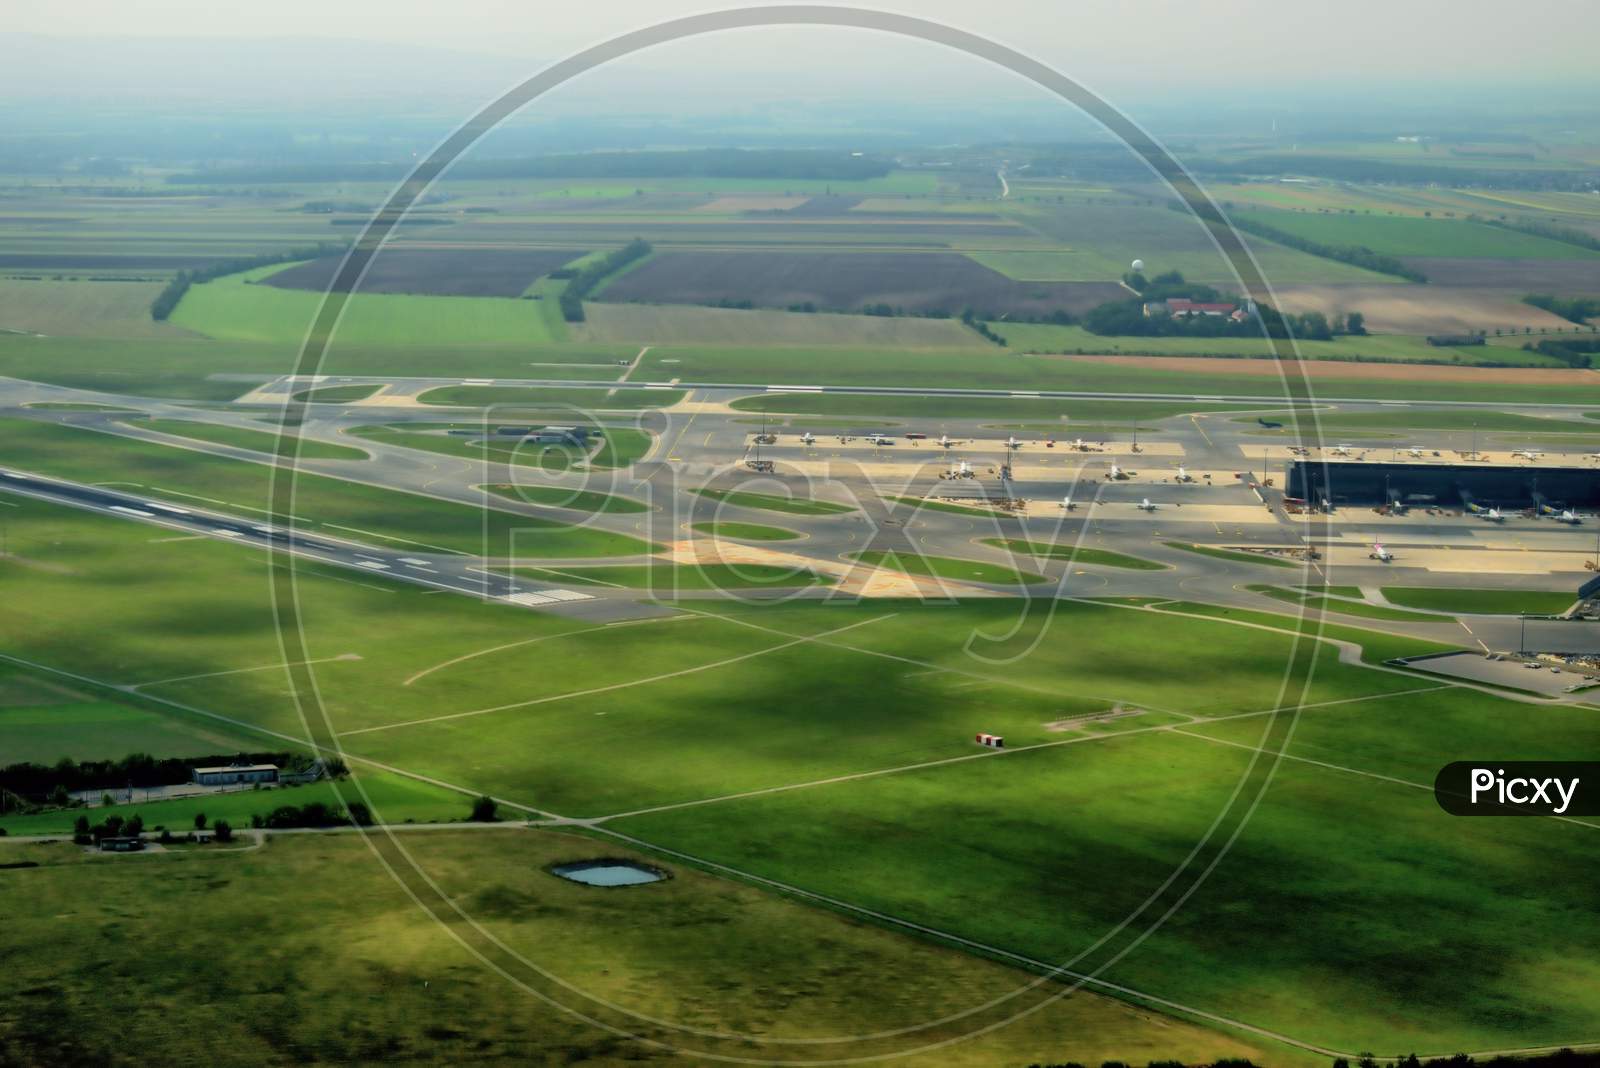 Image of Vienna international airport in Austria seen from a small